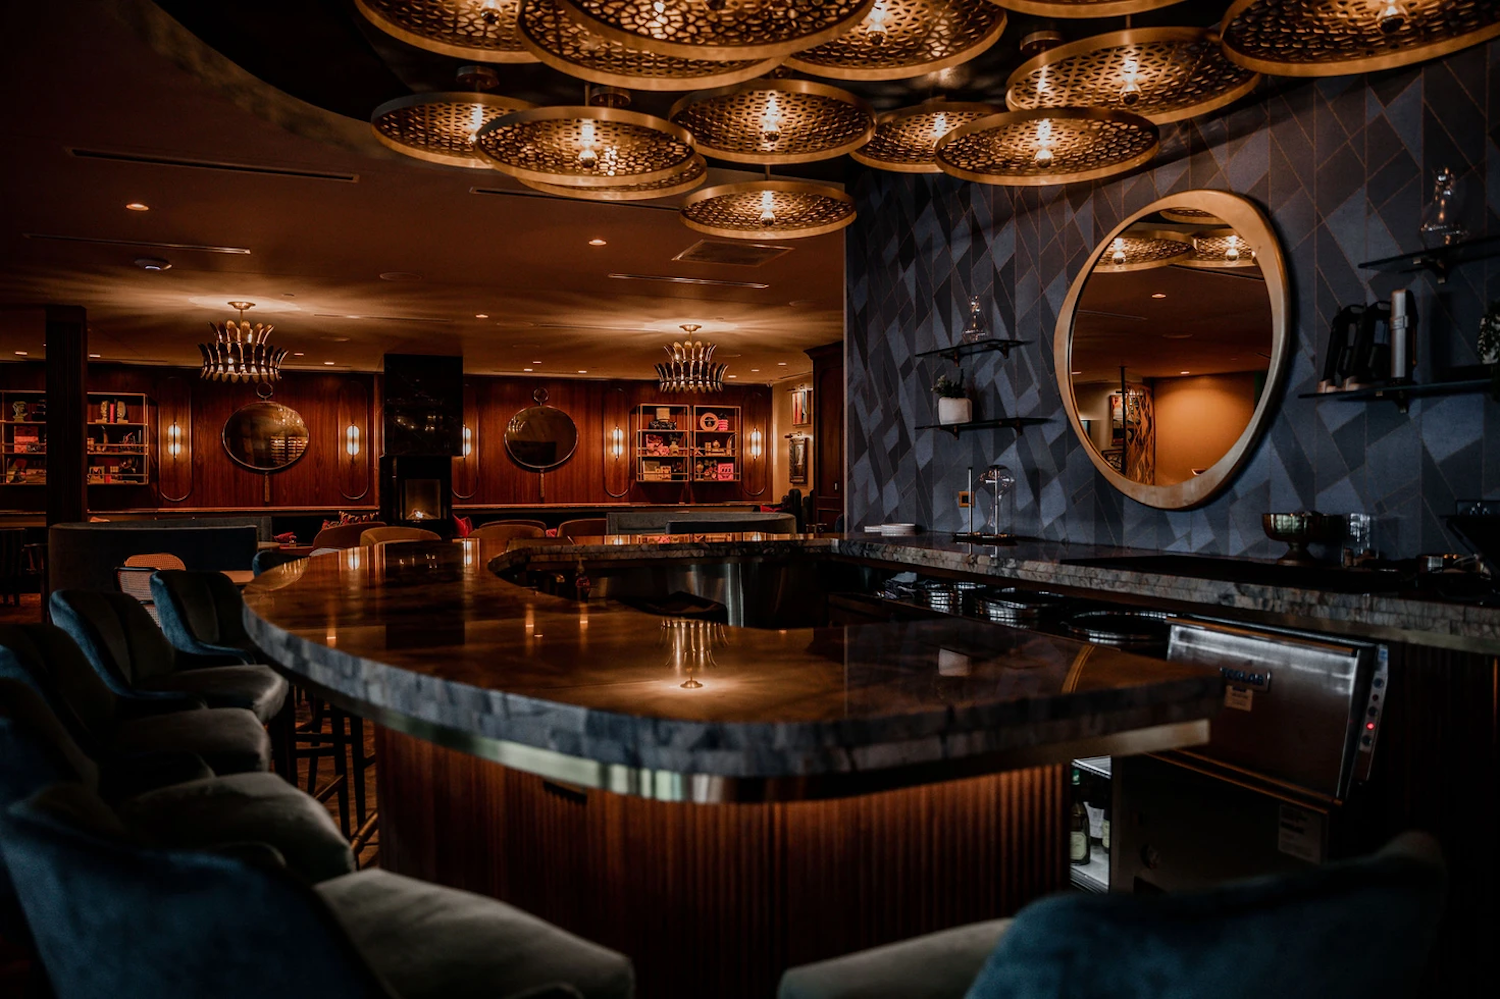 Dimly-lit bar area with dark wood and other dark decor